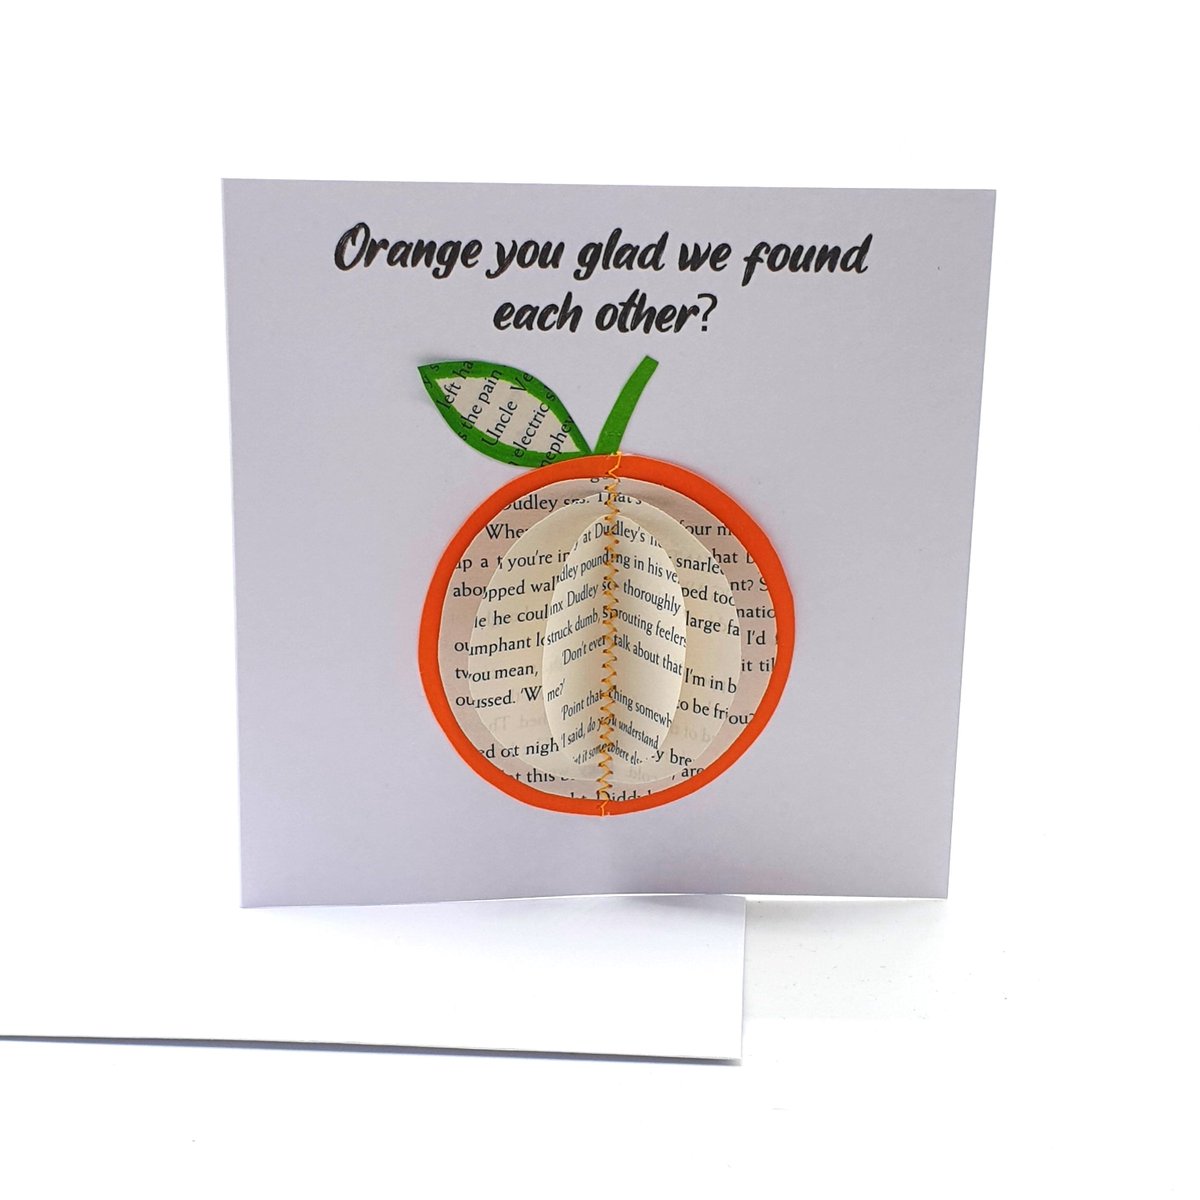 Orange Fruit Card Gift creatoncrafts.com/products/orang… #mhhsbd #Shopify #CreatonCrafts #PaperDecorations